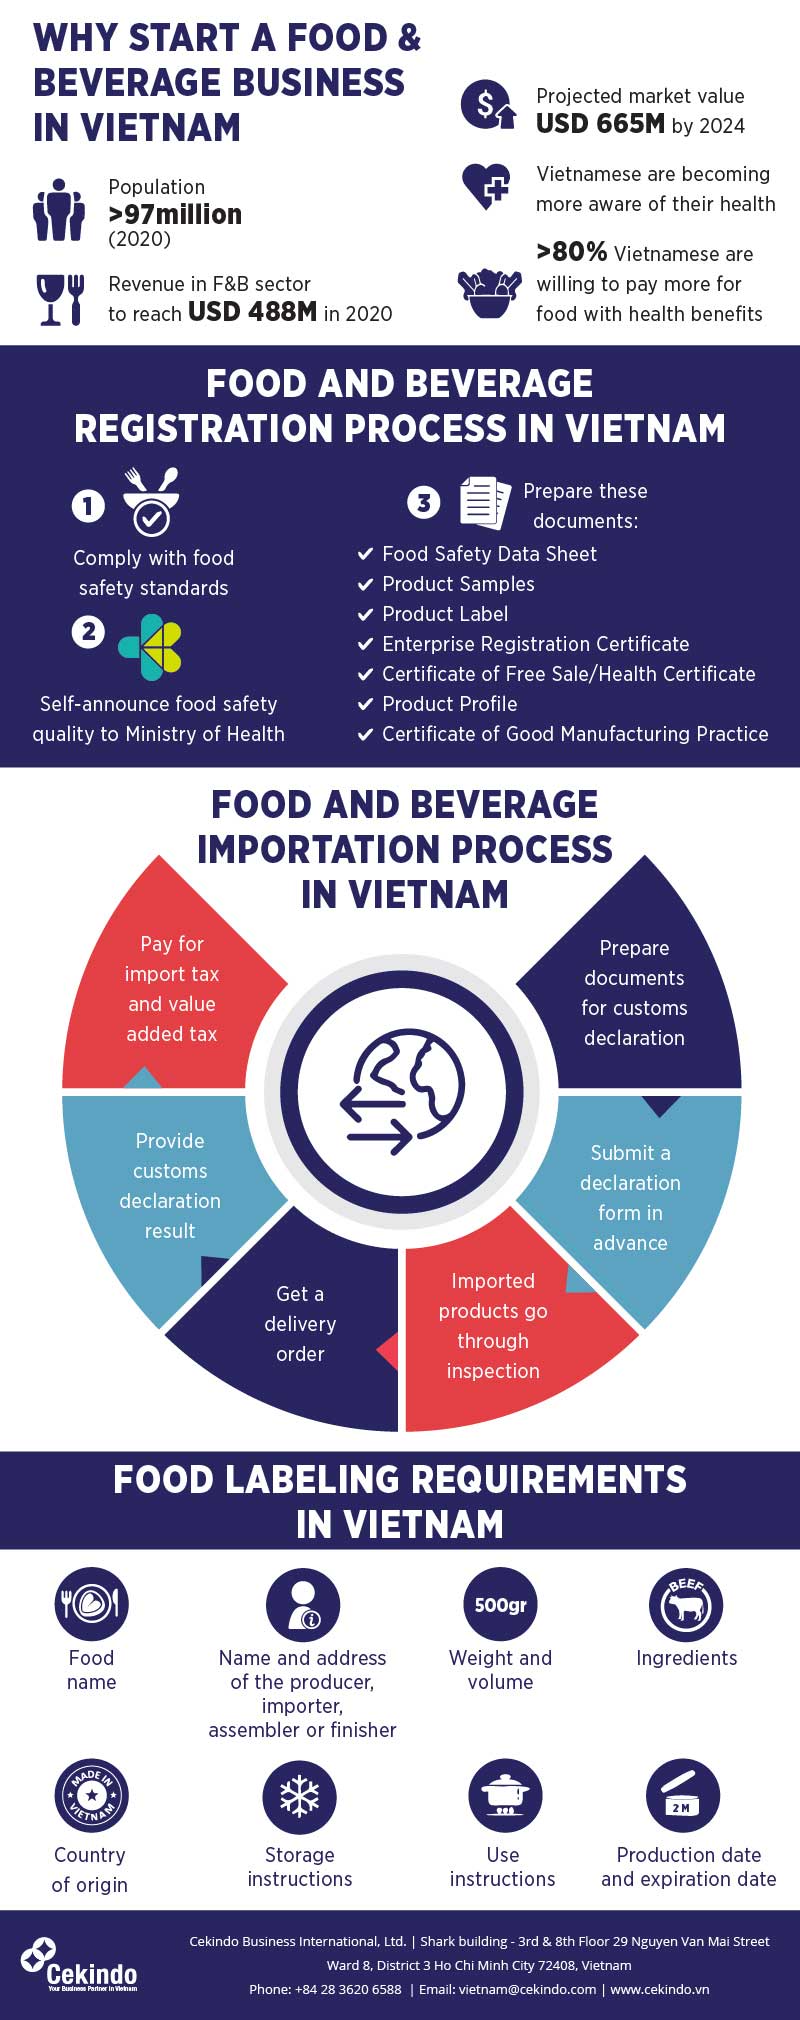 Food and Beverage Product Registration in Vietnam